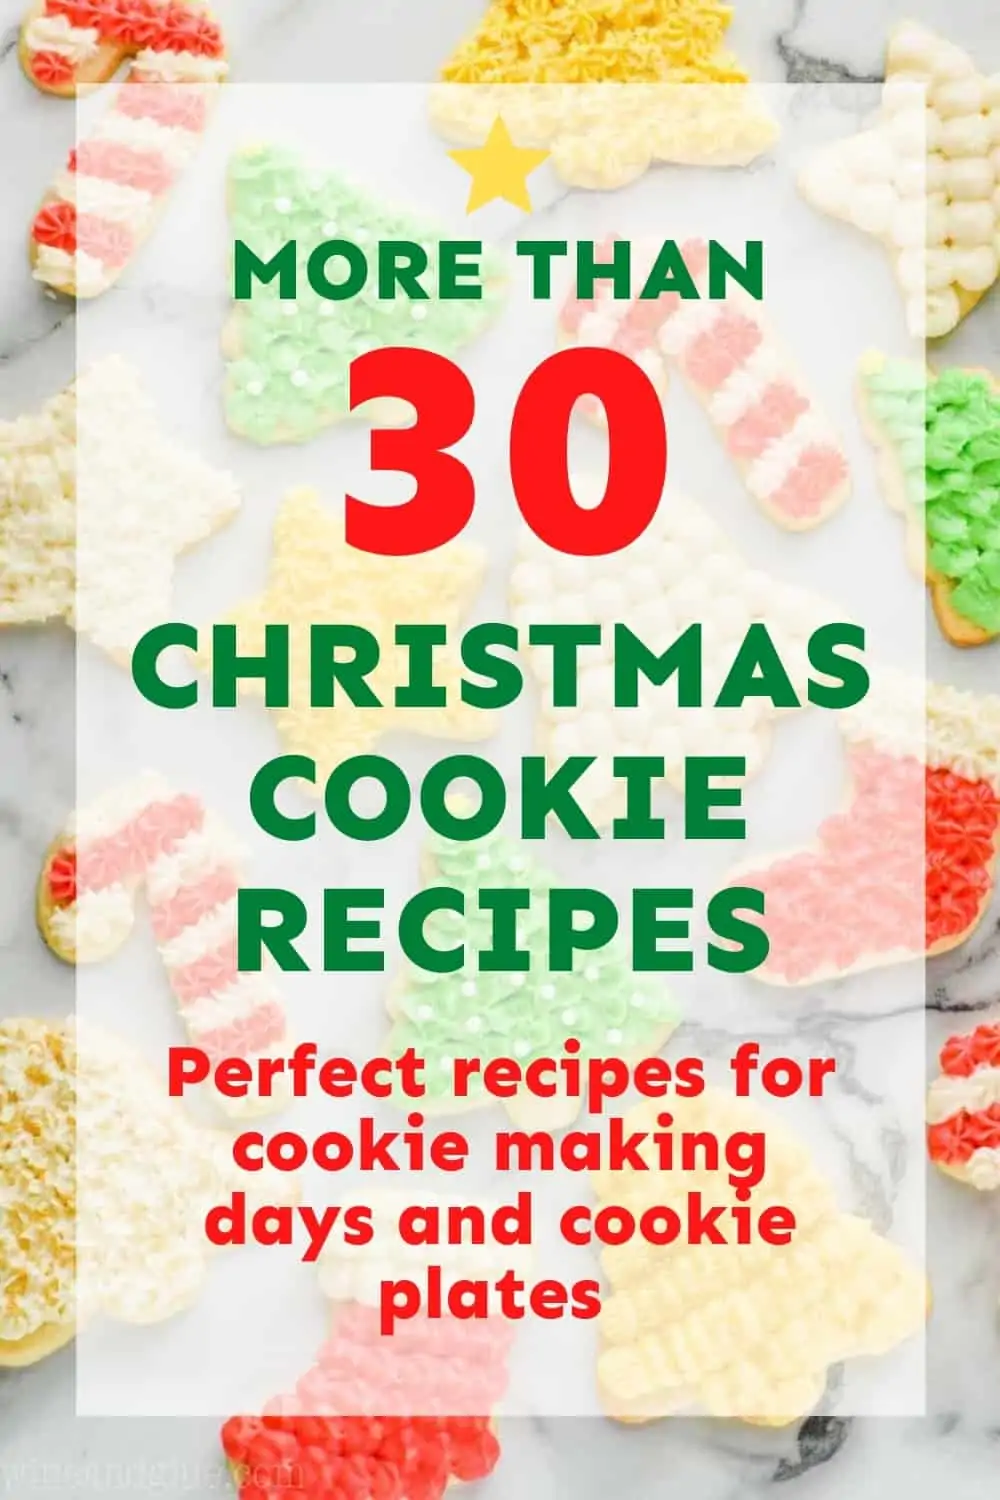 graphic saying more than 30 Christmas cookie recipes, perfect recipes for cooking making days and cookie plates